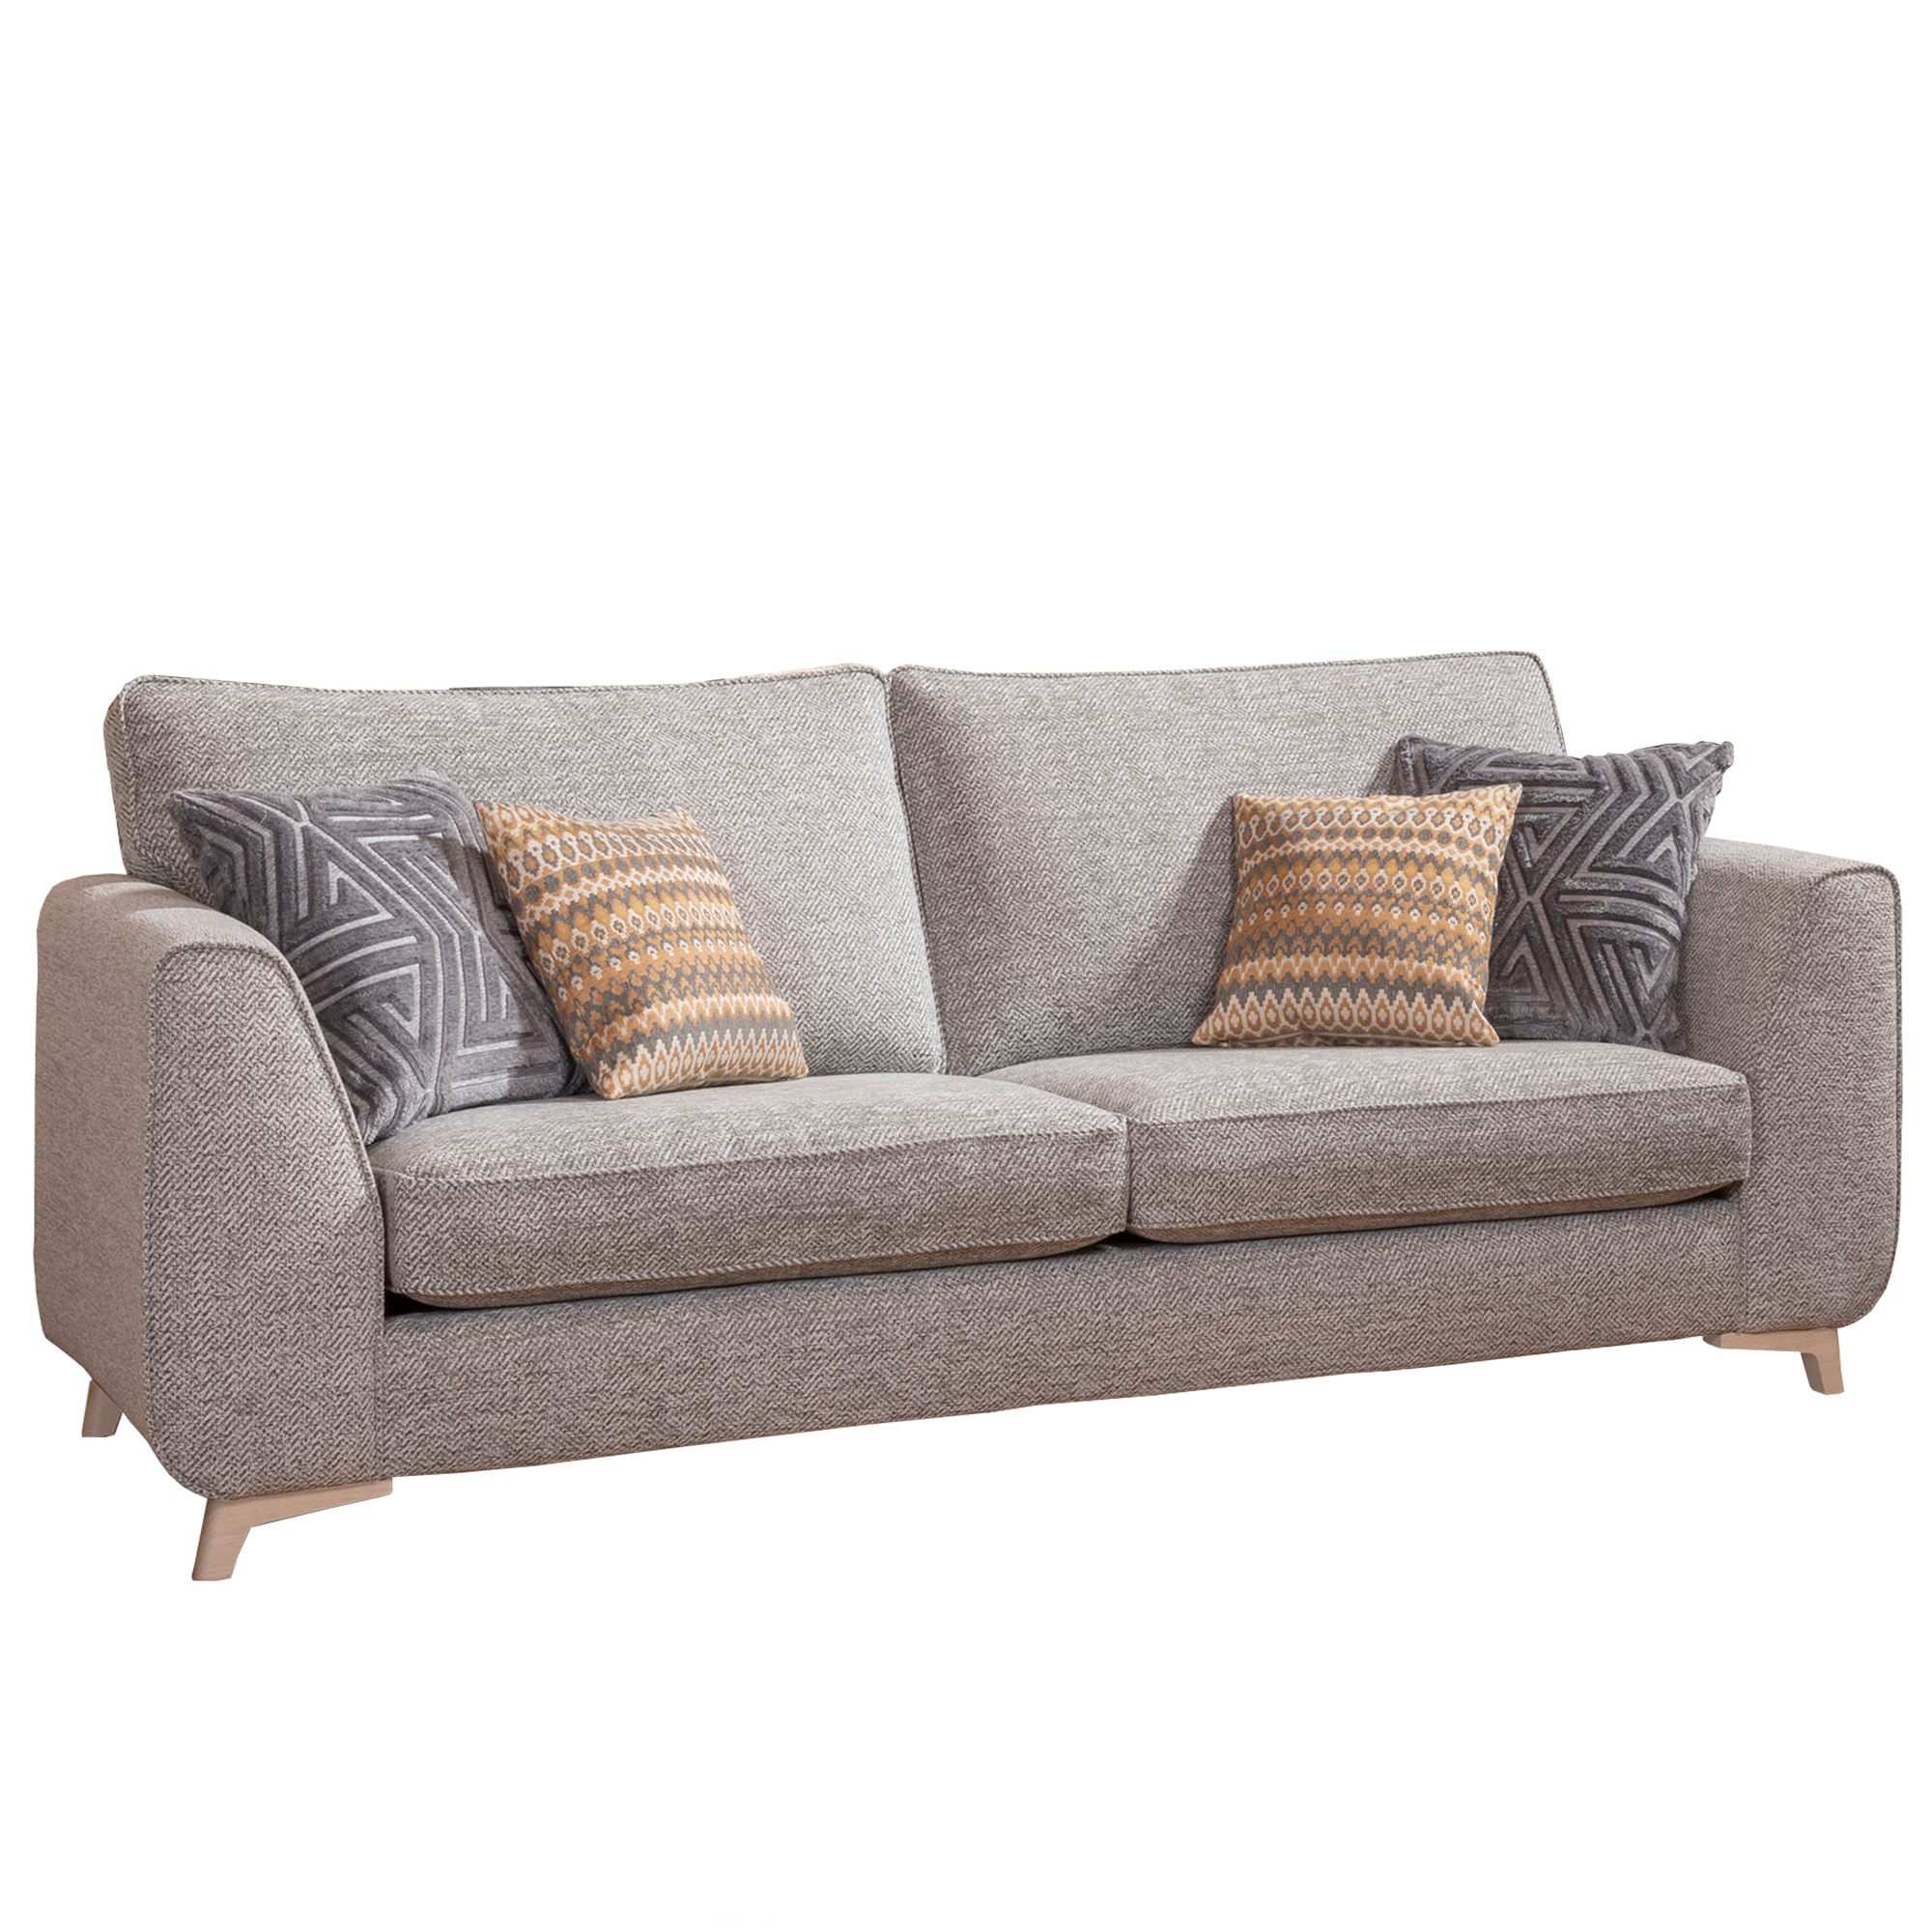 Cookes Collection Hallie Grand Sofa All Sofas Cookes Furniture